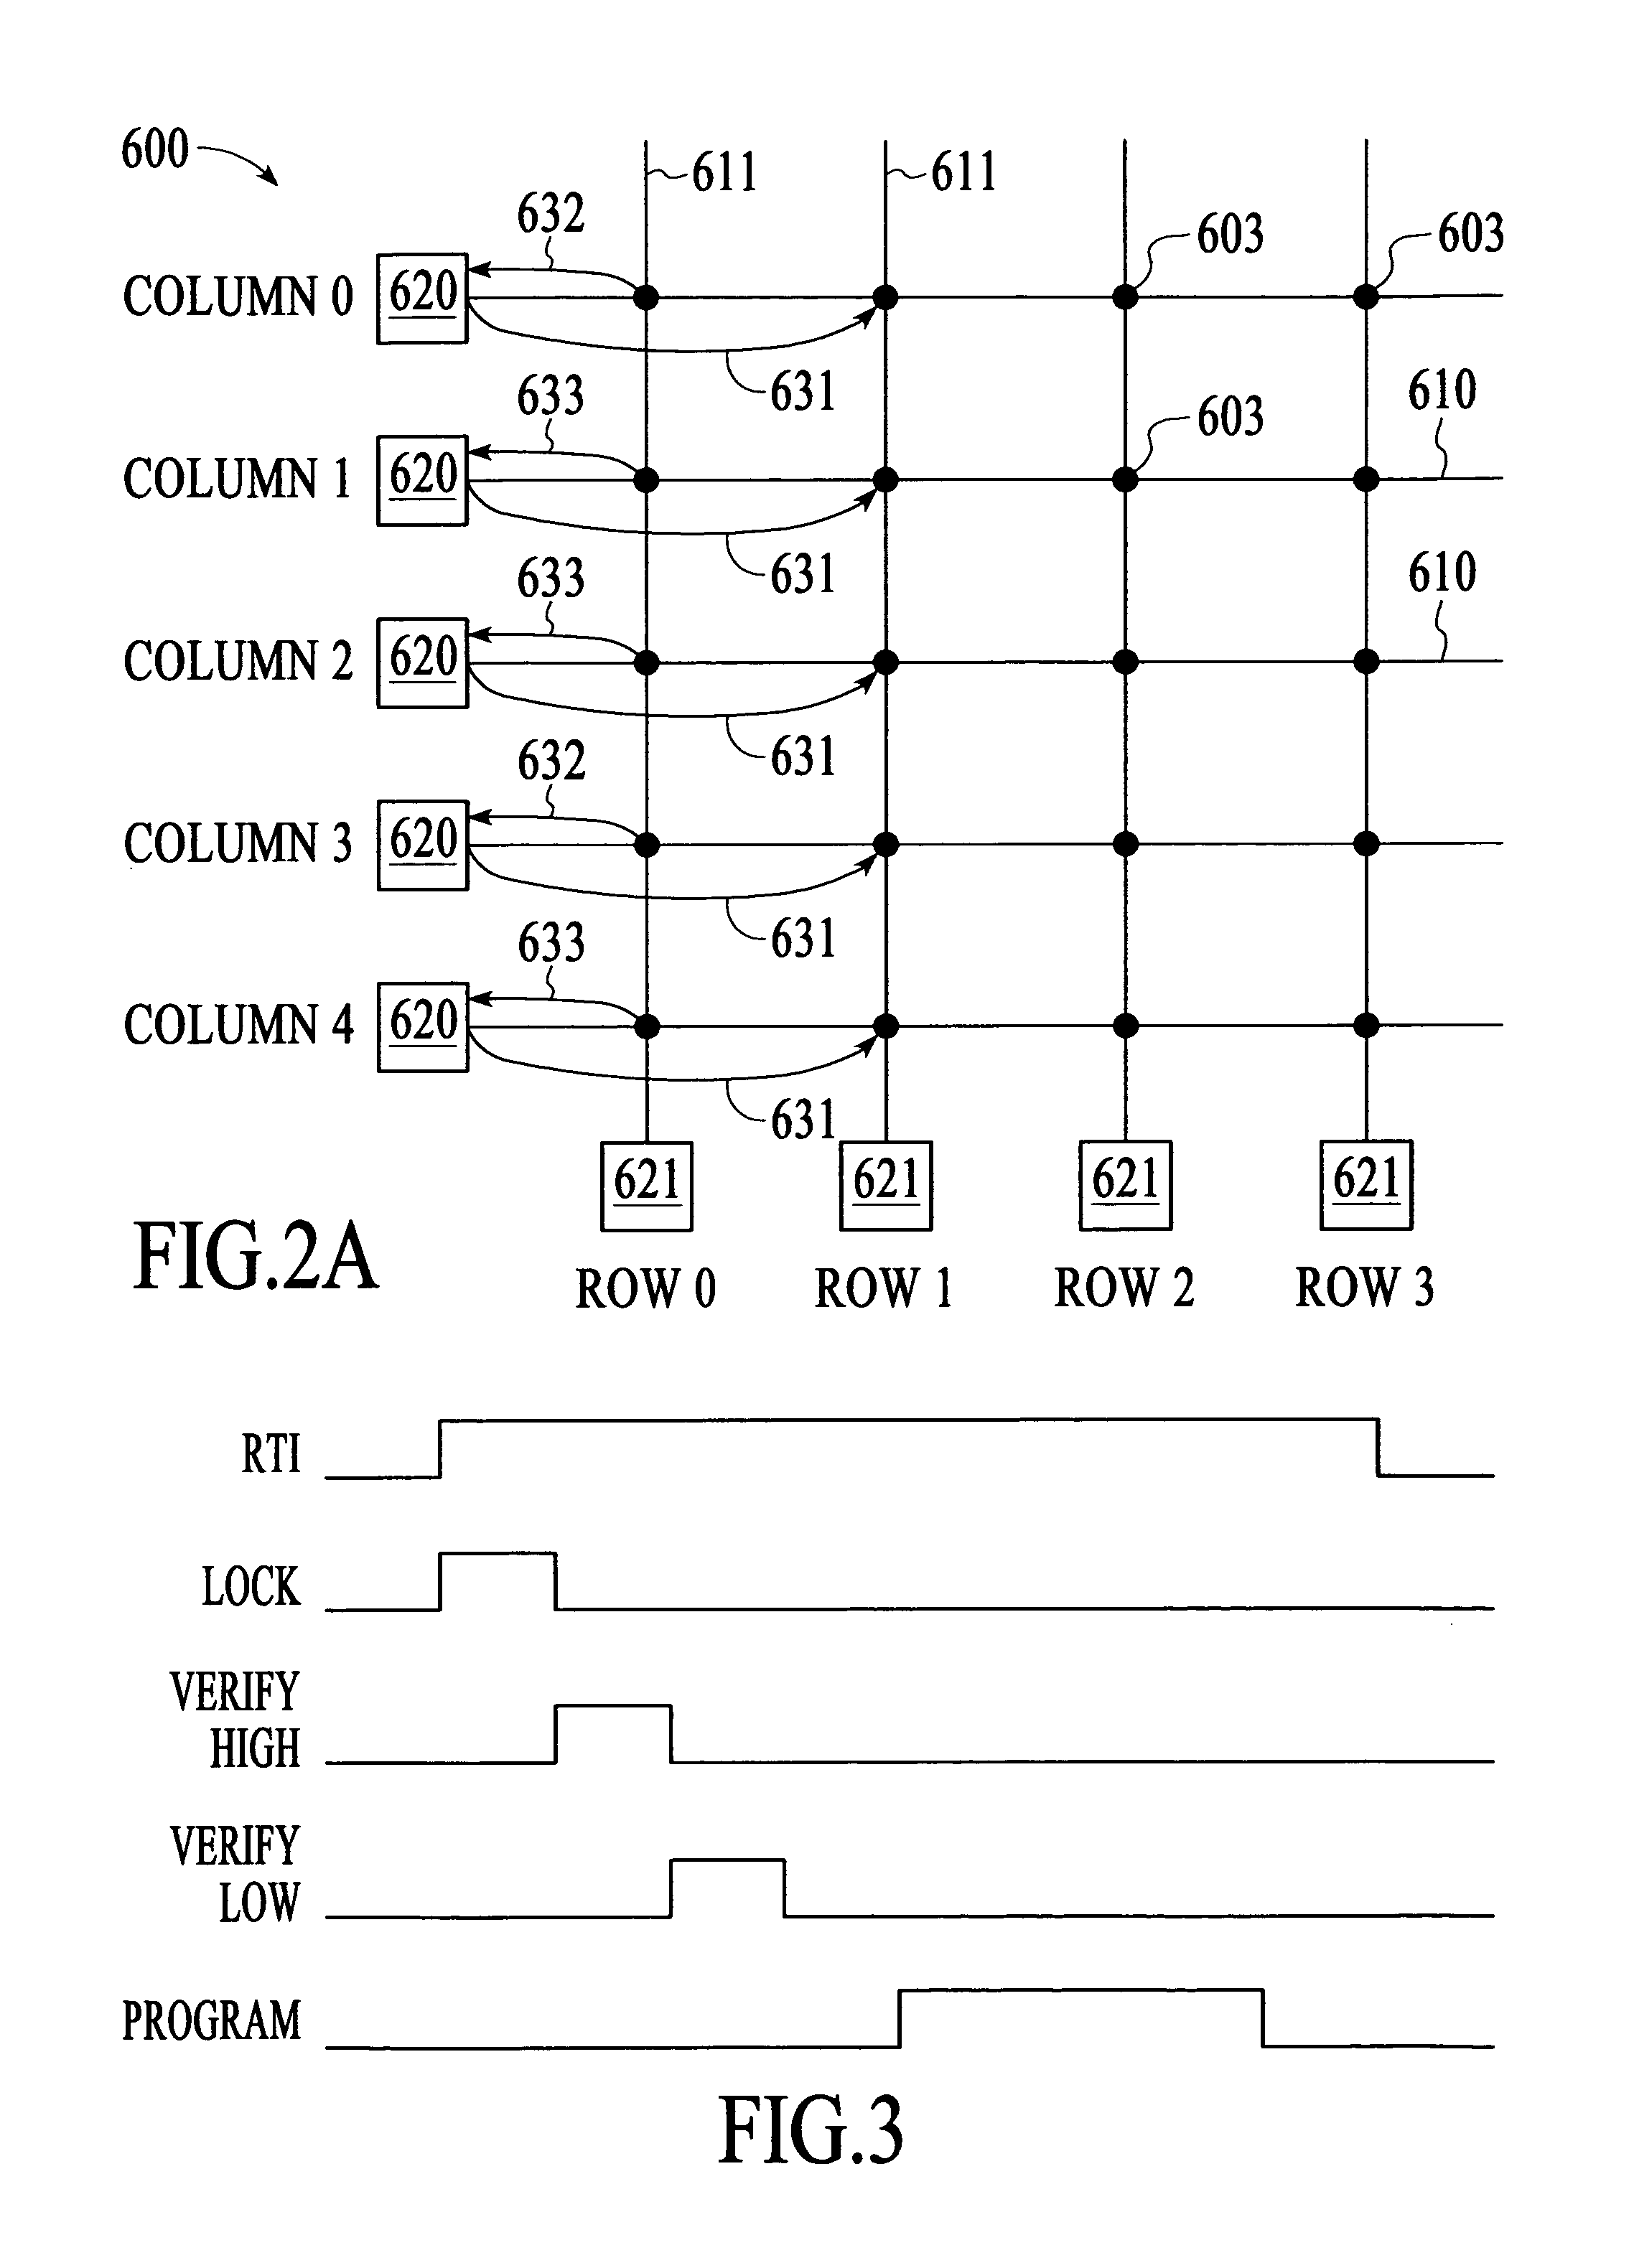 Techniques for programming and verifying data in a programmable circuit